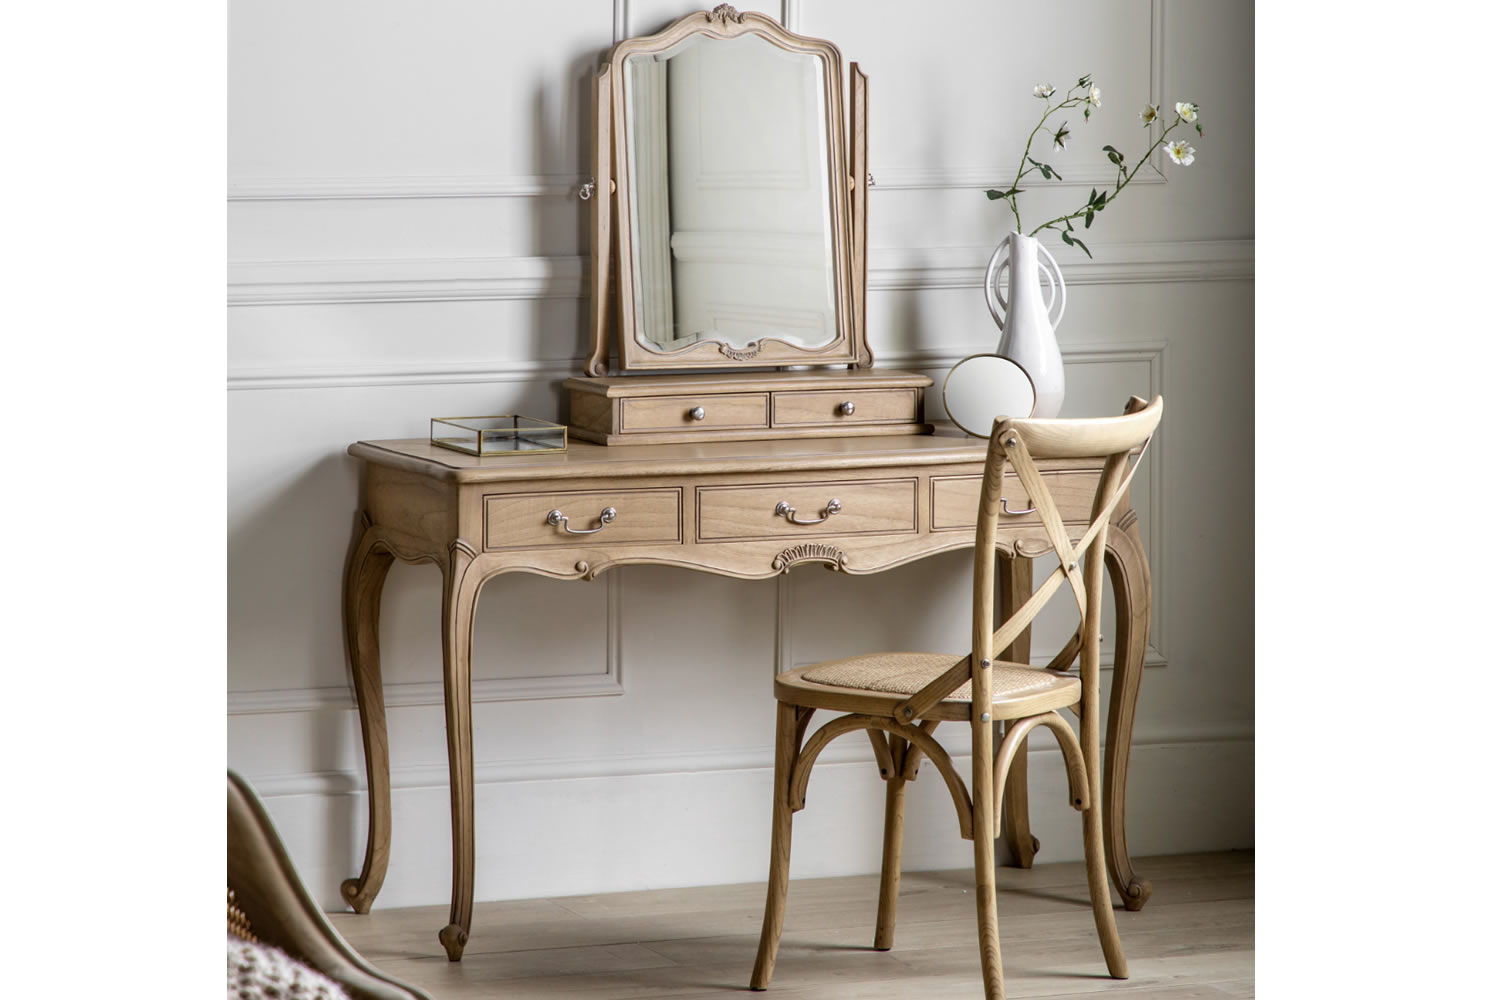 View Chic 3drawer Dressing Table With Decorative Handles Weathered Finish Ample Storage Space Living Room Or Bedroom Storage Table Frenchinspired information